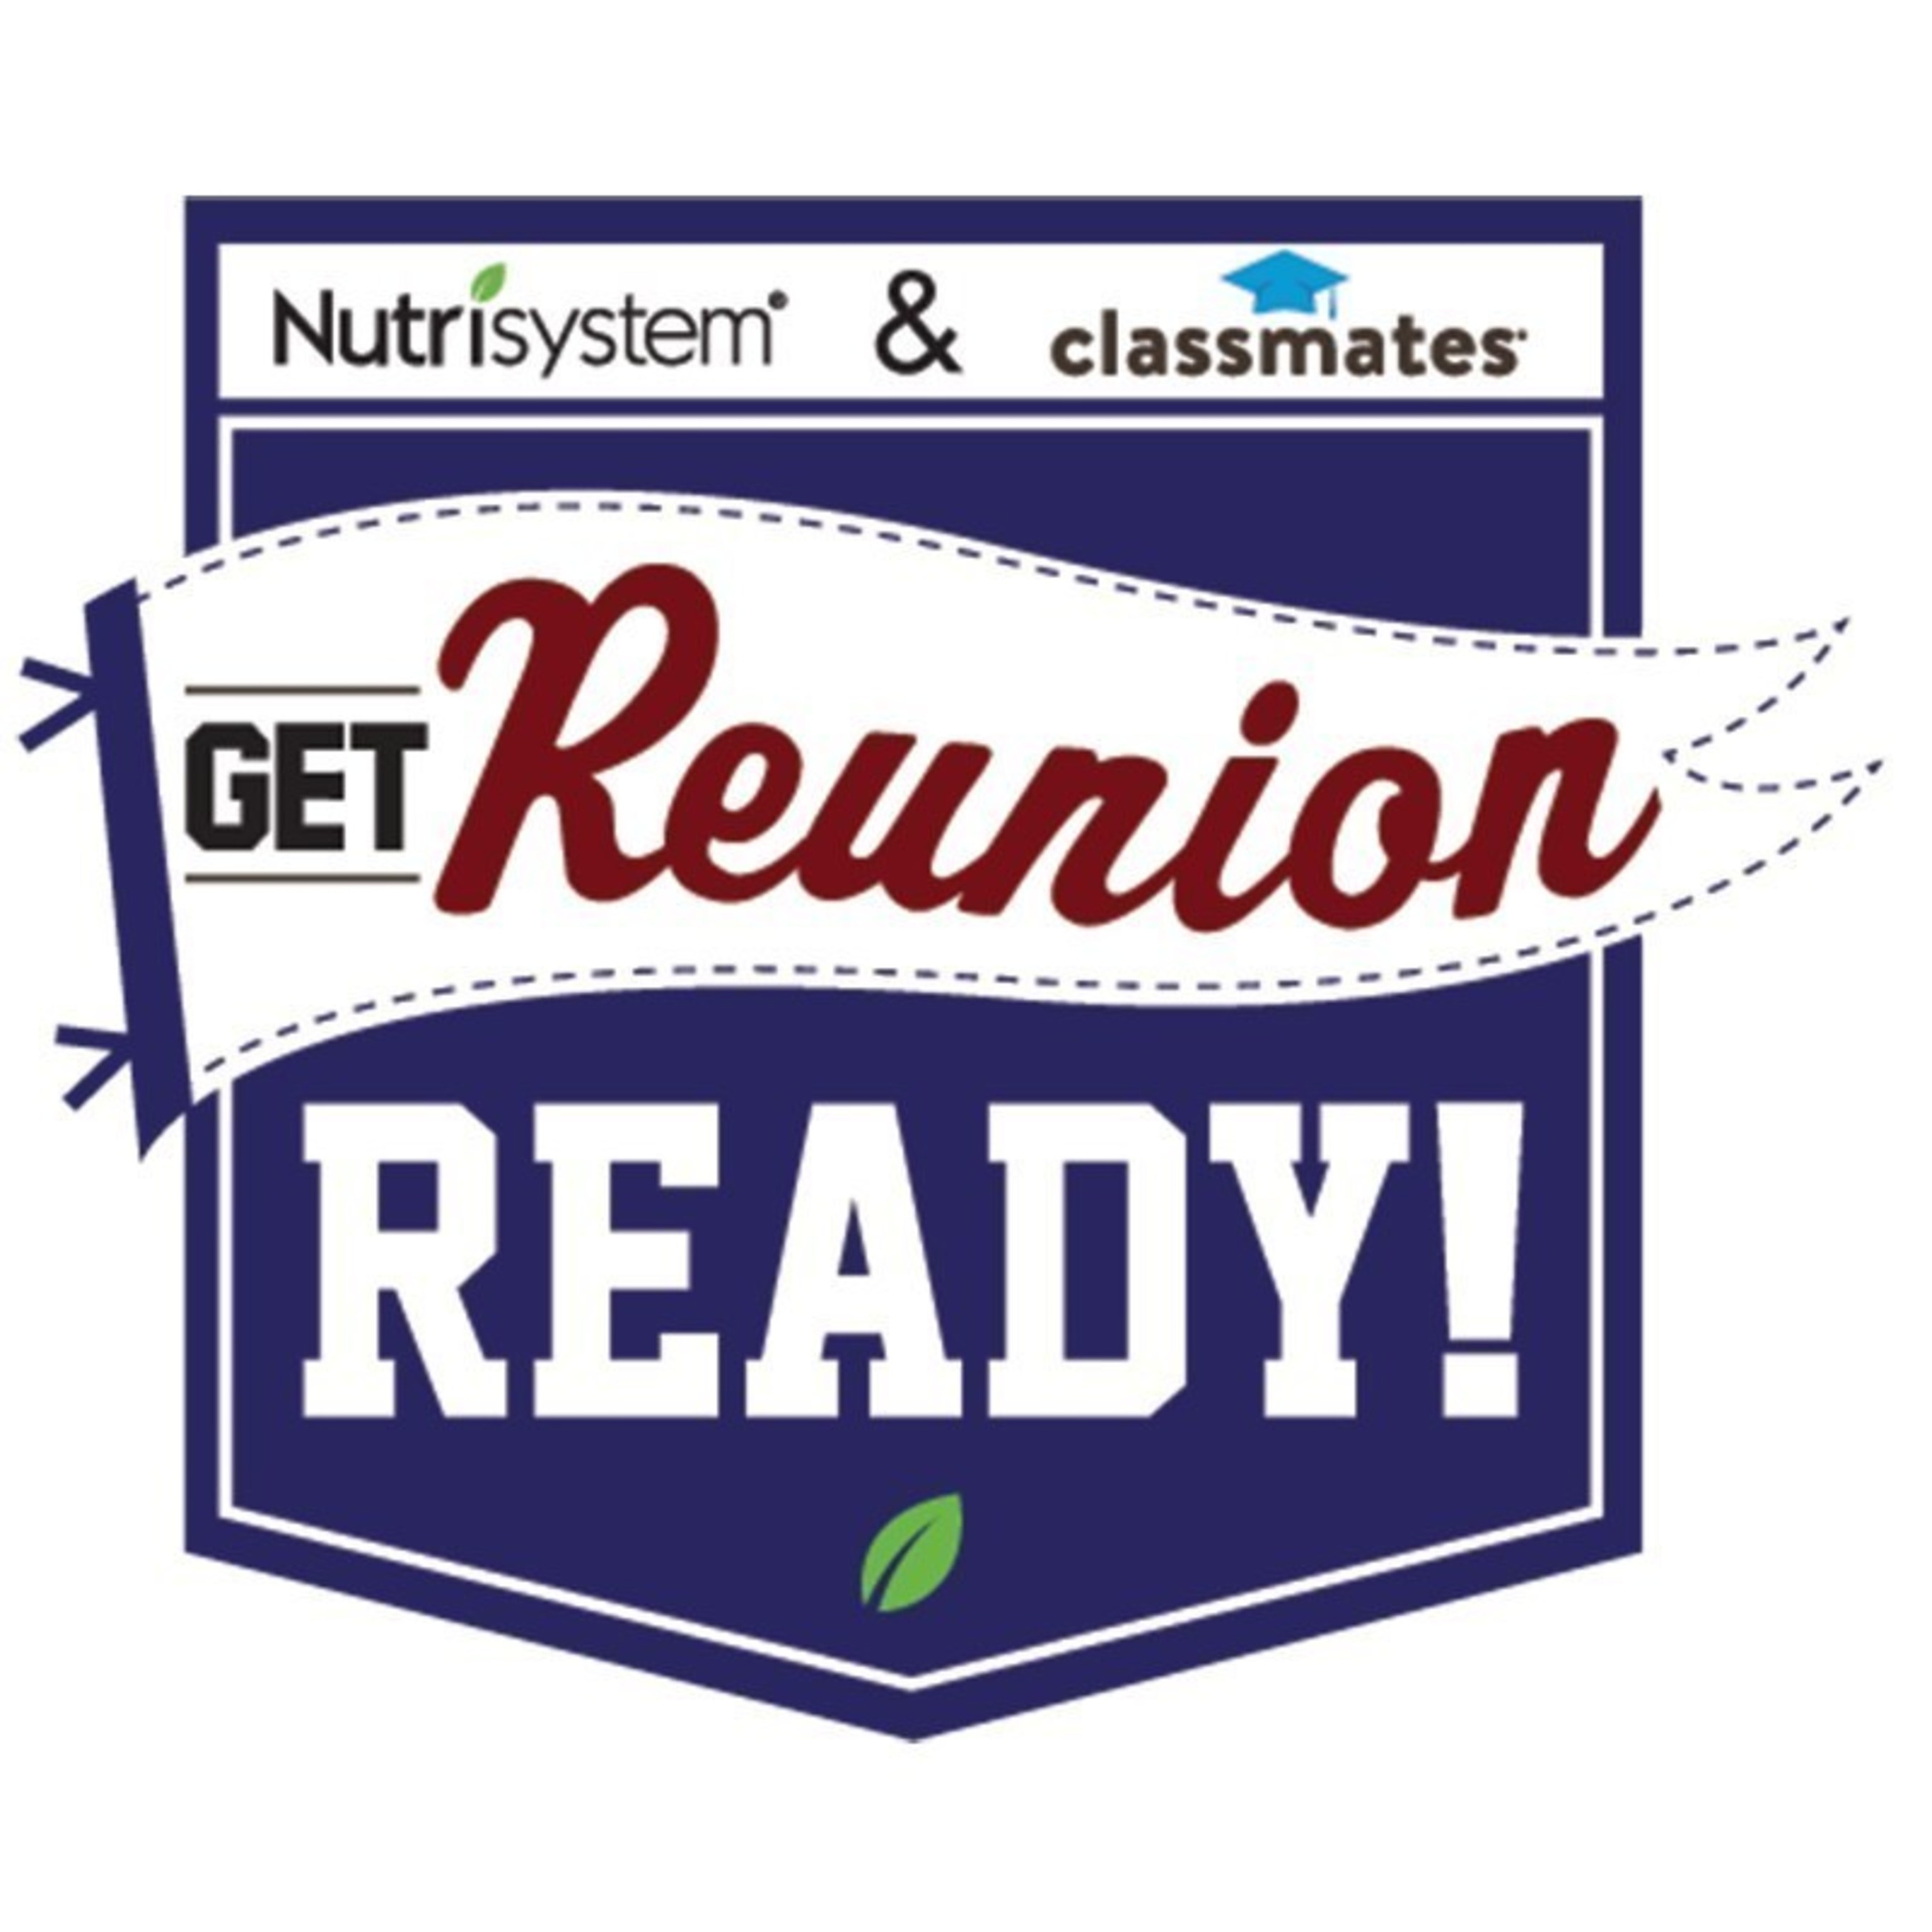 Classmates Announces Get Reunion Ready! Sweepstakes with Nutrisystem